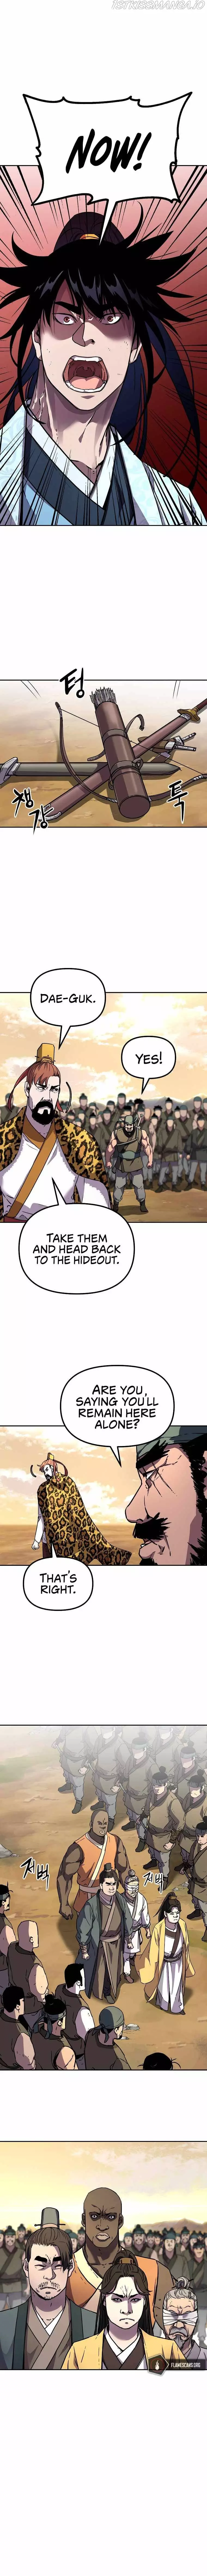 The Previous Life Murim Ranker - 46 page 9-f8dd6ac3